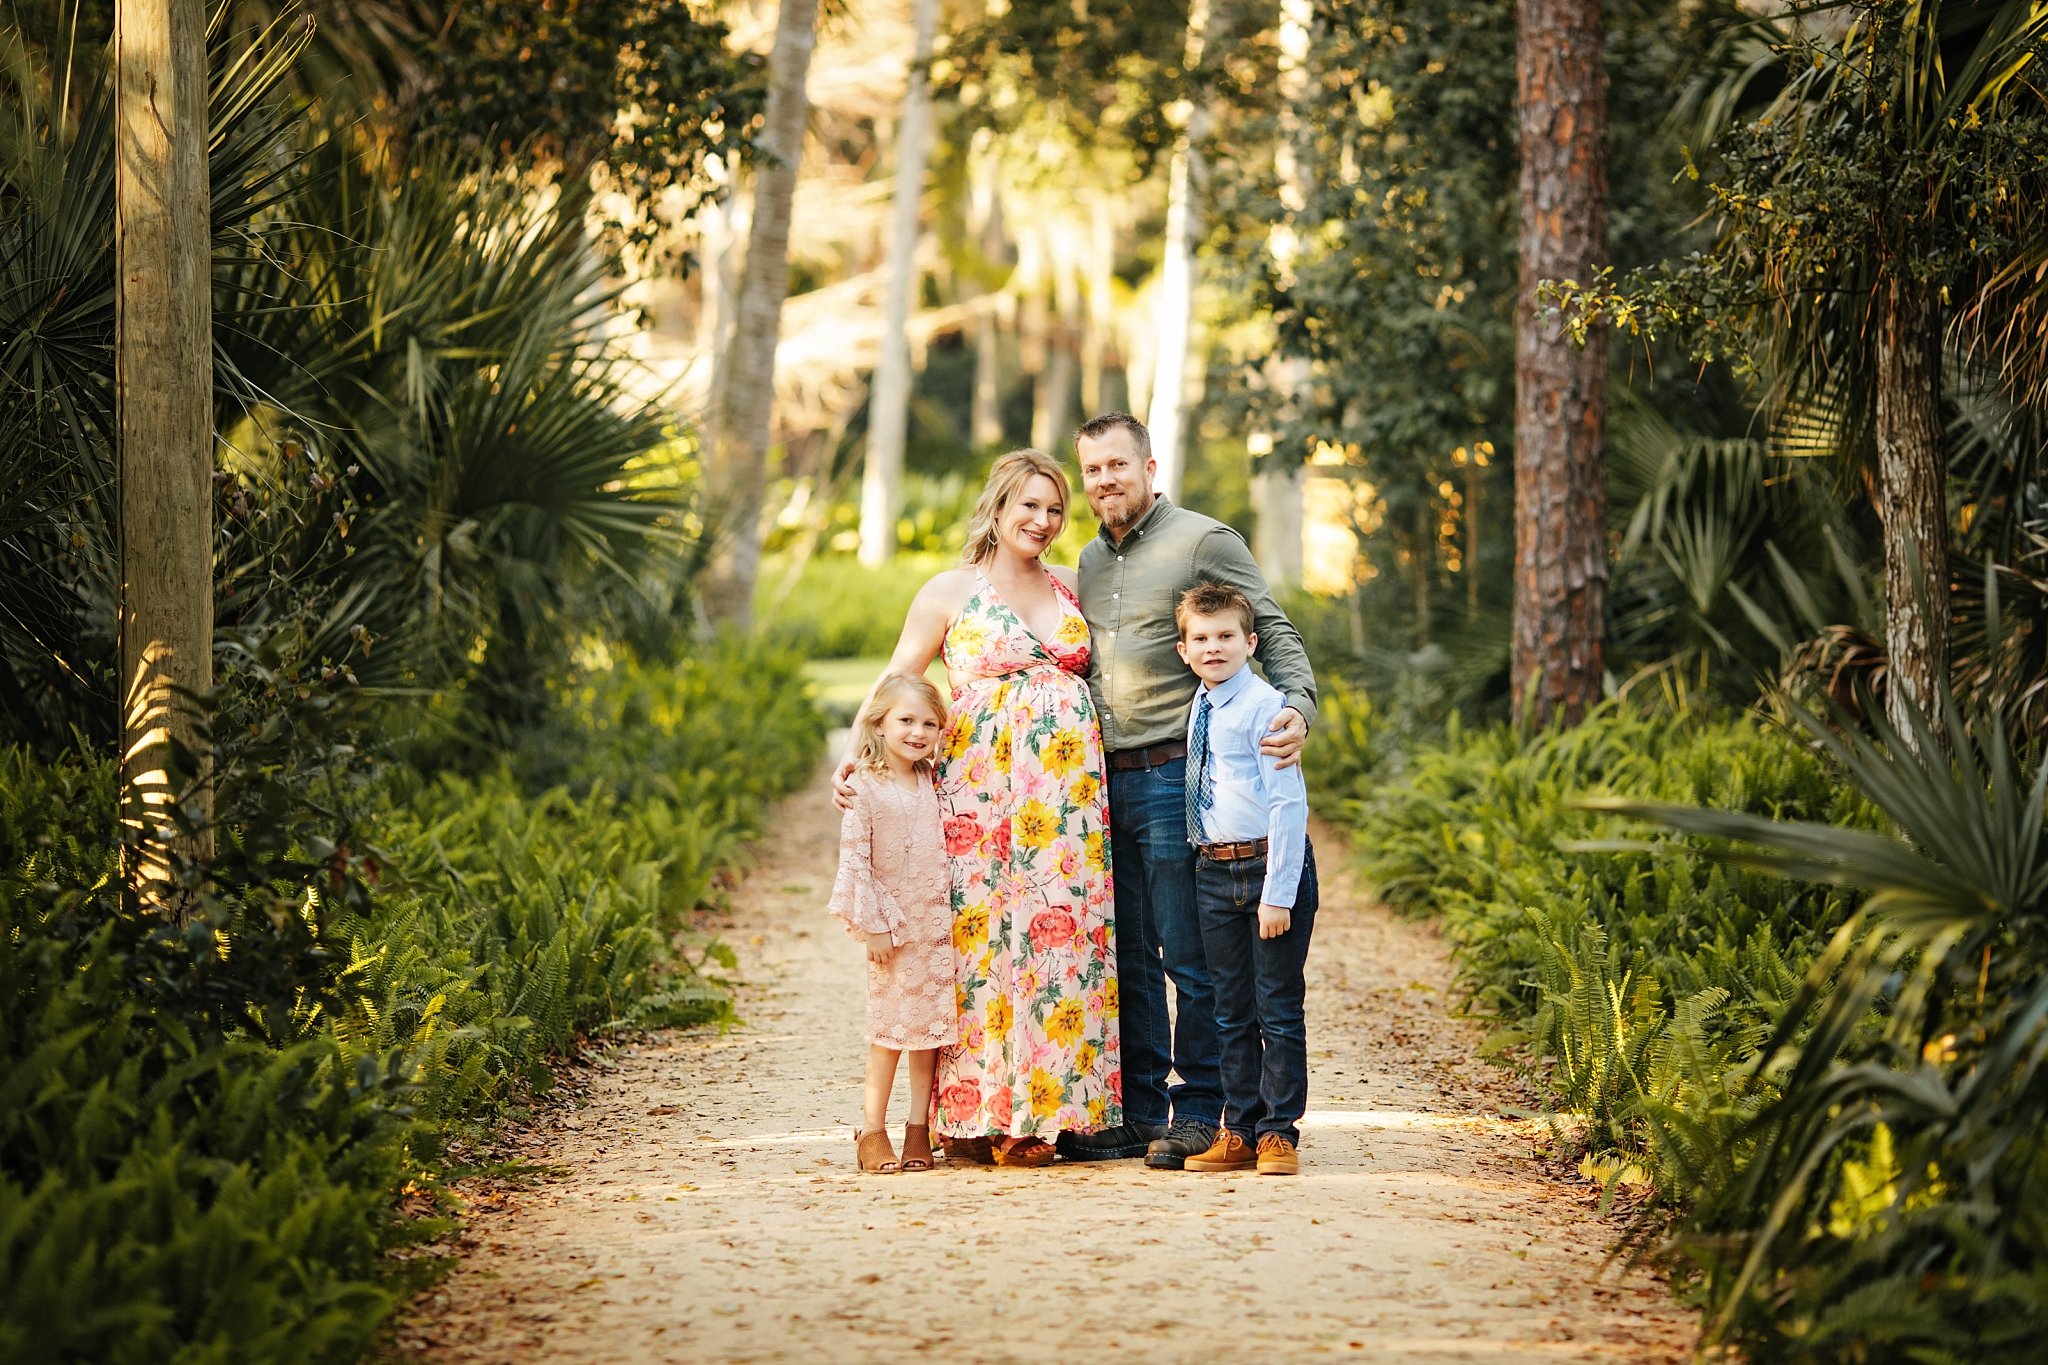 St Augustine Maternity Photographer Washington Oaks Gardens State Park Family of 4 pregnant mom in long floral dress standing on woodsy path